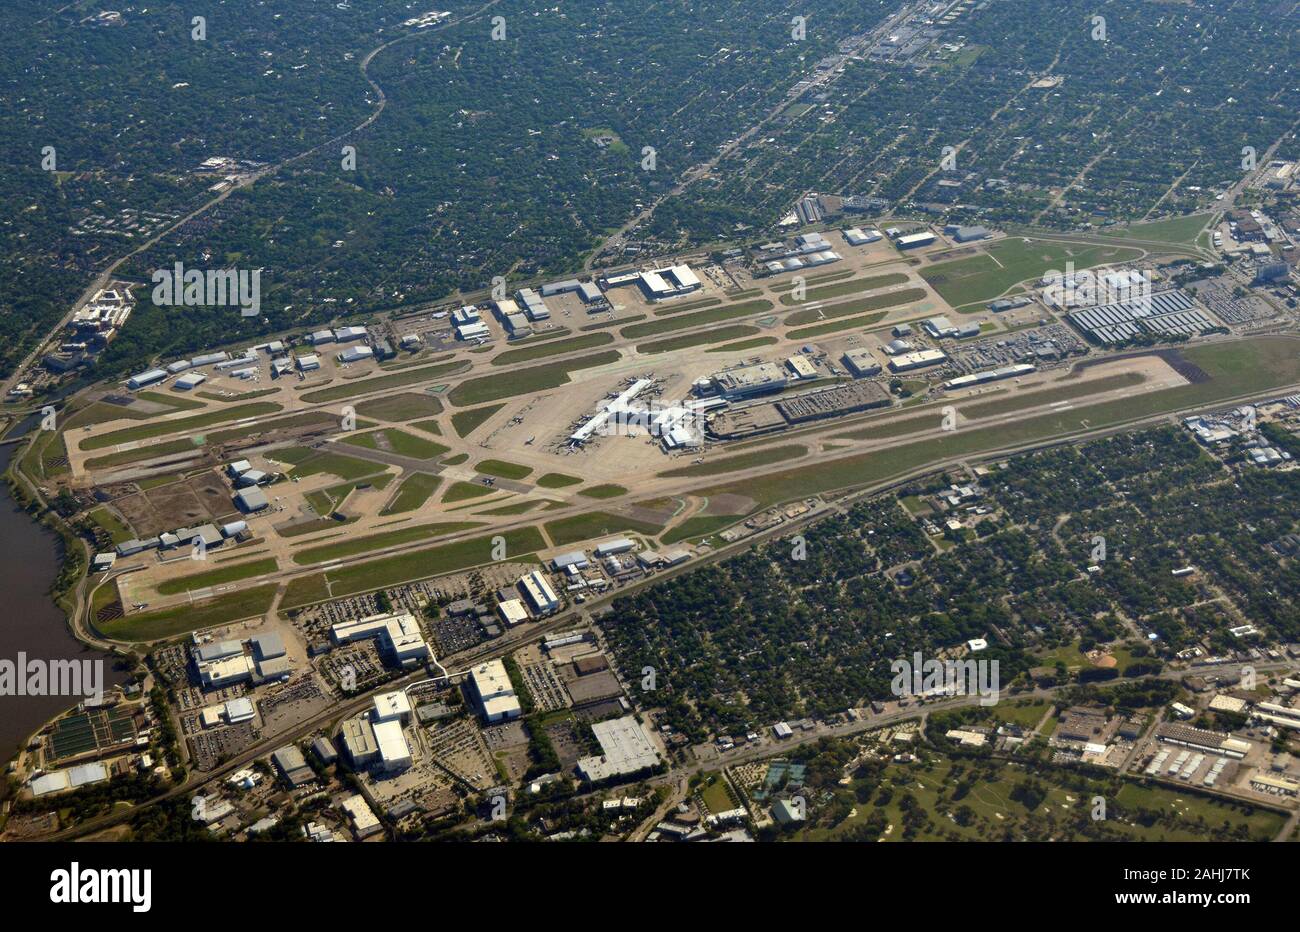 Dallas Love Field (KDAL) airport seen from high altitude. Stock Photo